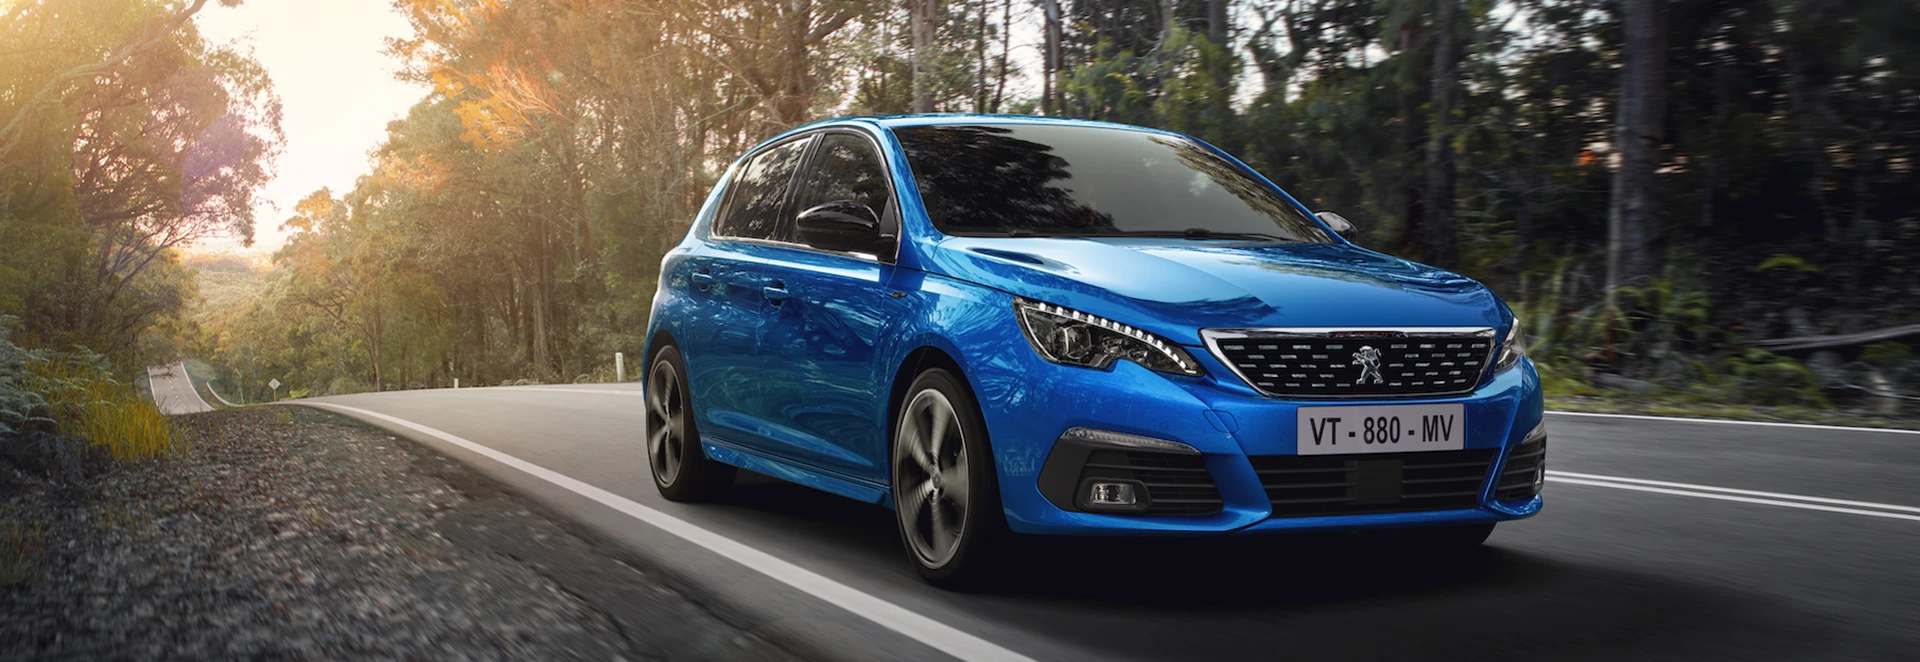 Peugeot updates 308 with new trim levels and technology 